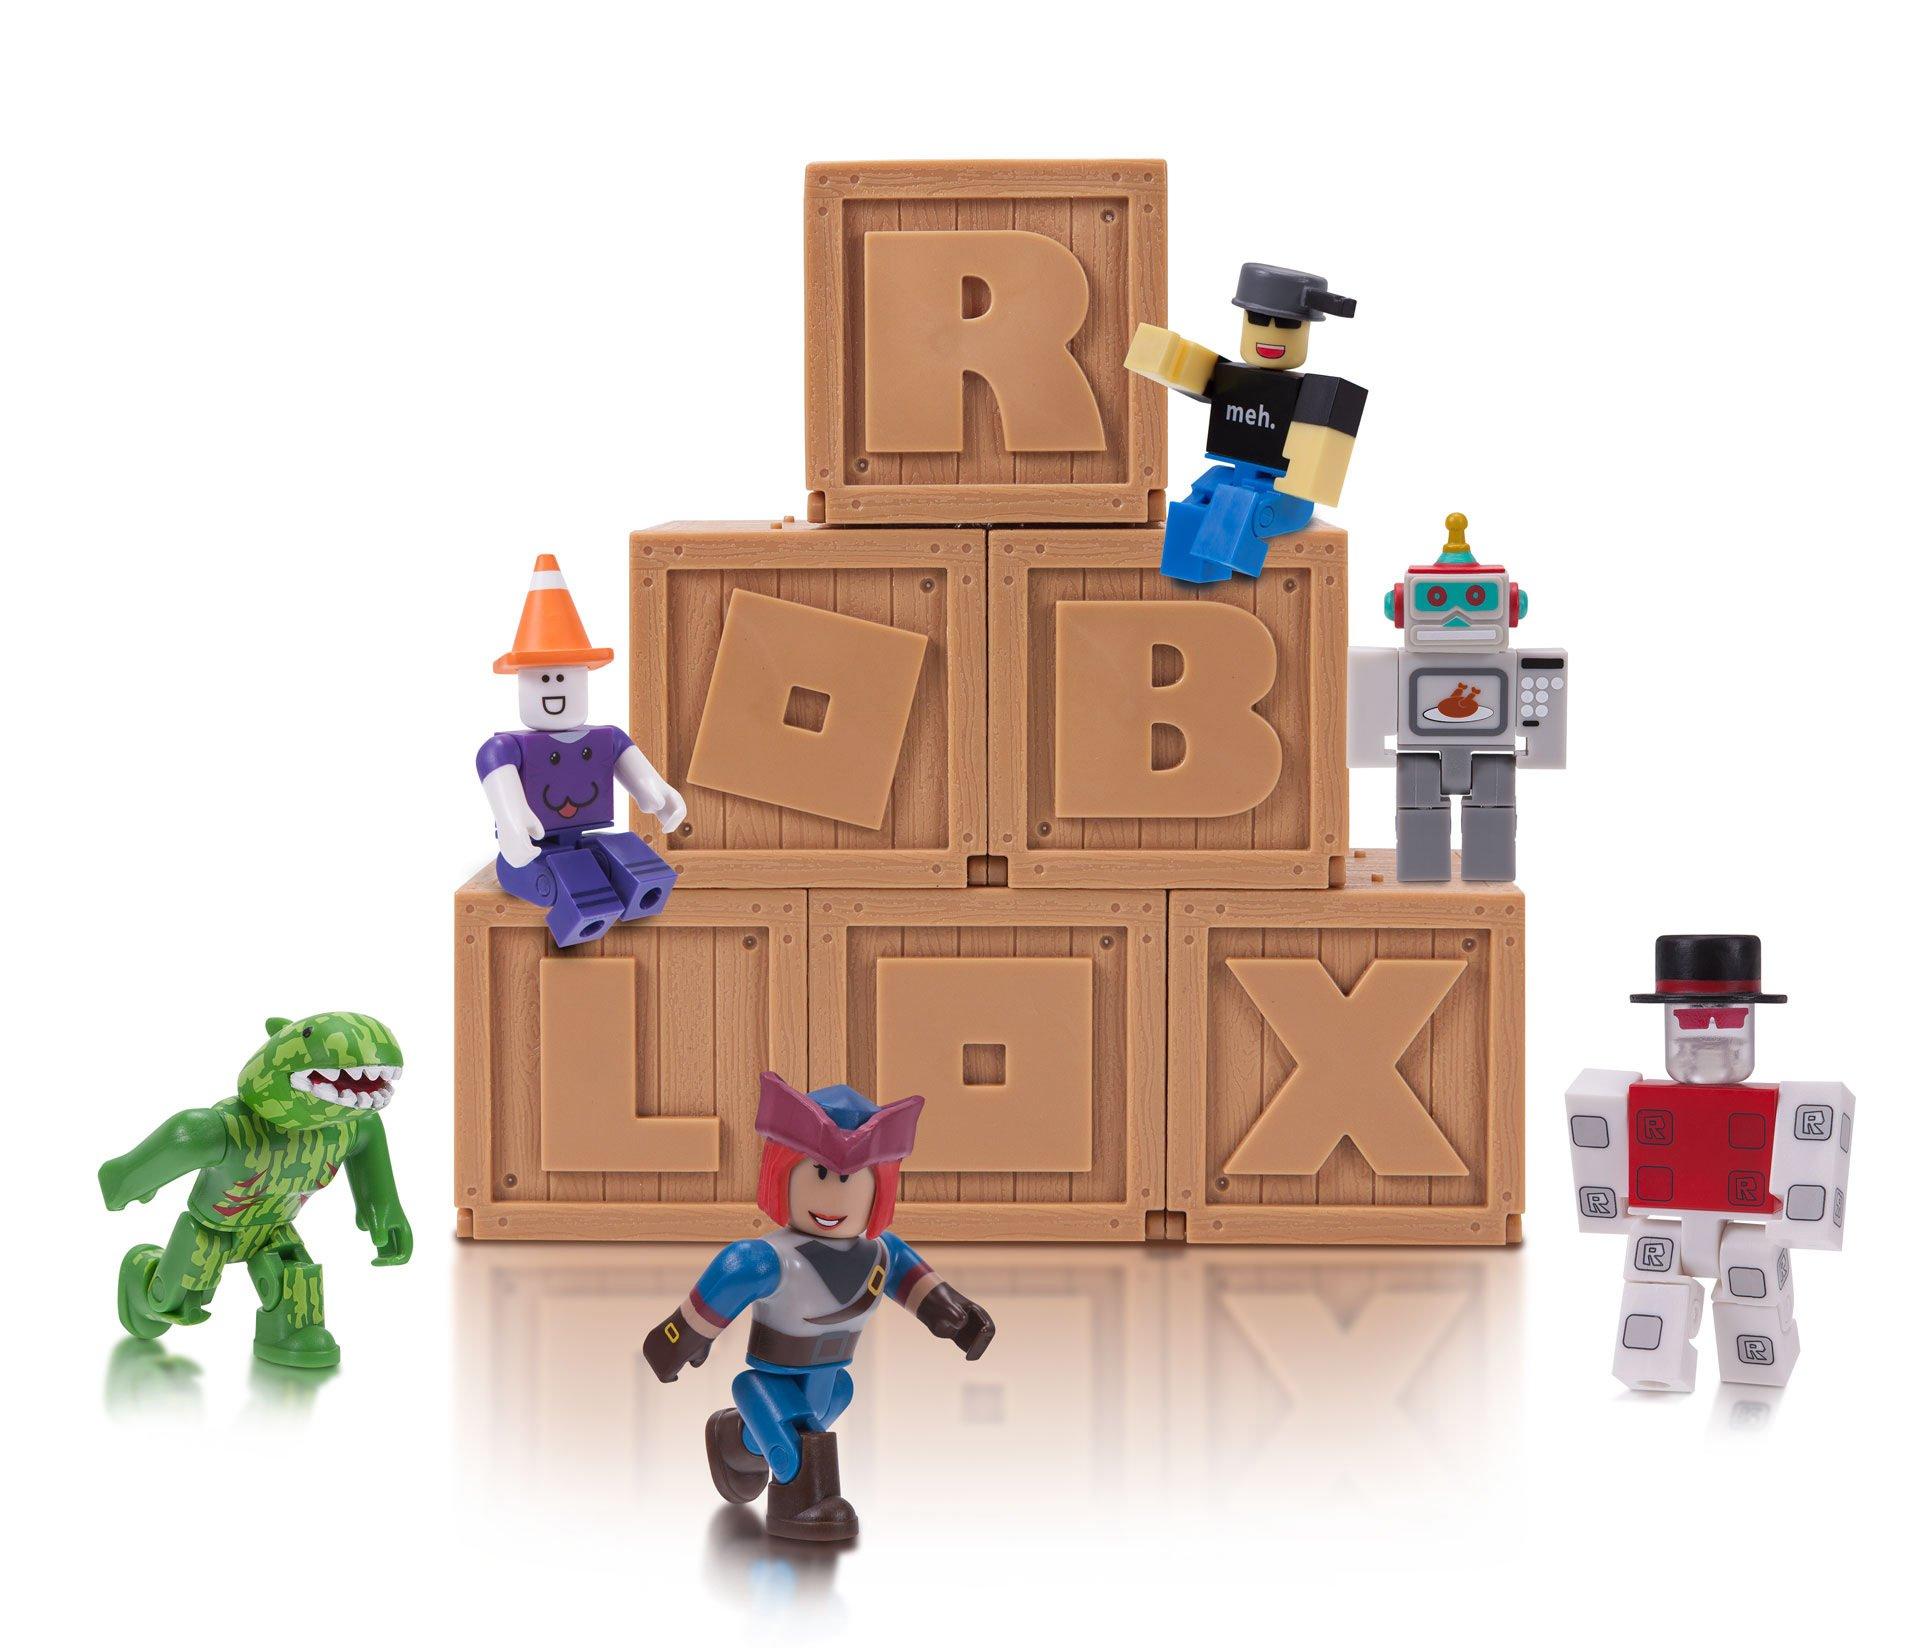 Roblox Action Figure Classic Series 2 Character Pack For Kid S Toy Gift Mini Toy Action Figures Fzgil Toys Hobbies - roblox action figures series 2